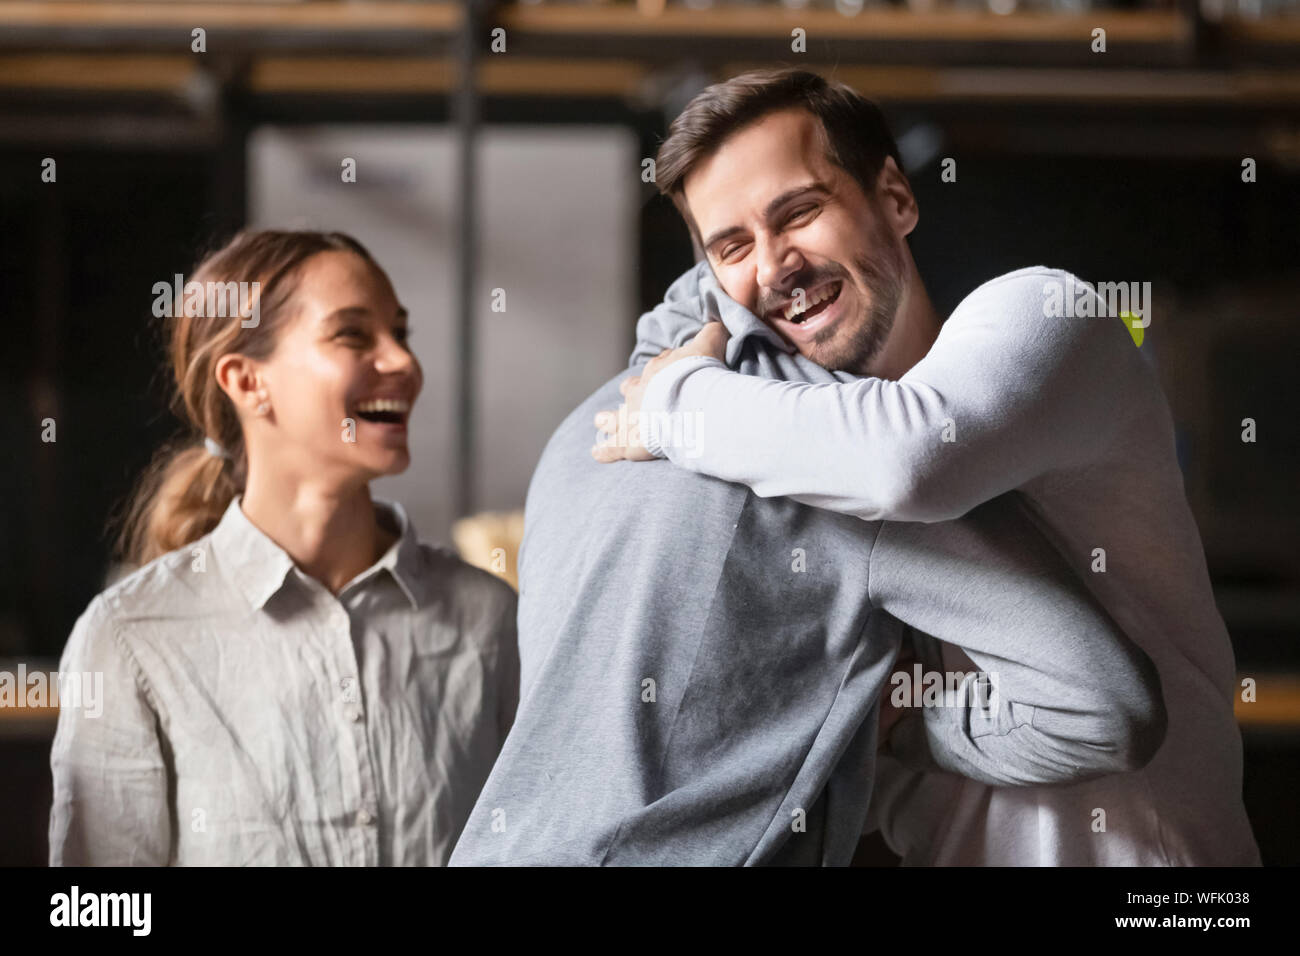 Happy diverse male buddies embracing laughing greeting in cafe Stock Photo